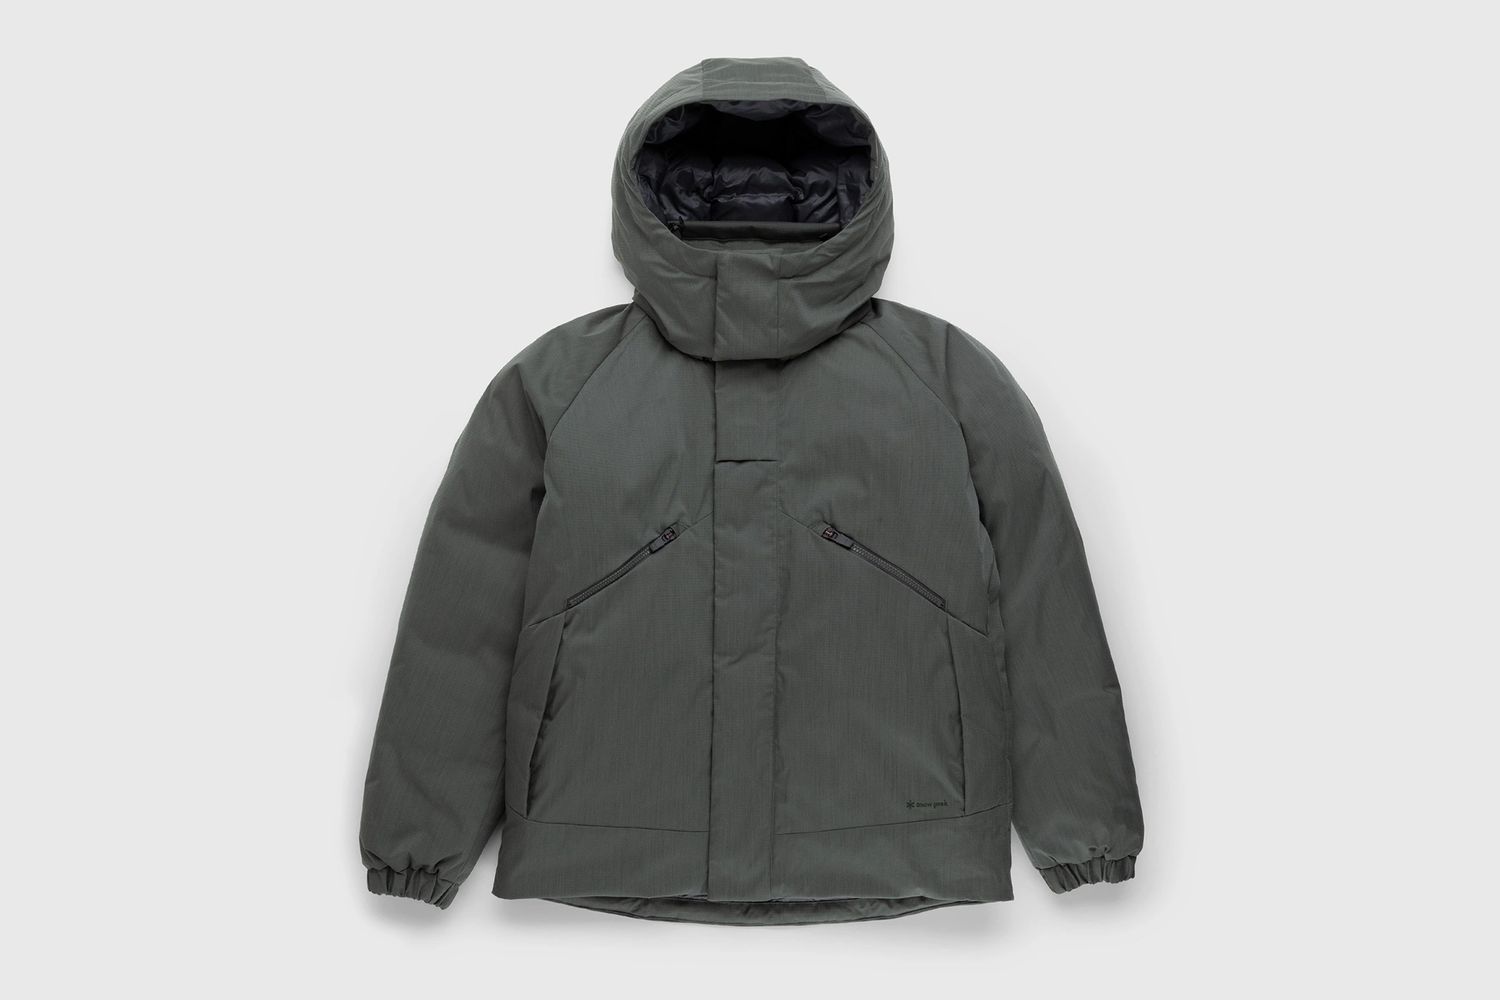 Fire-Resistant 2 Layer Down Jacket